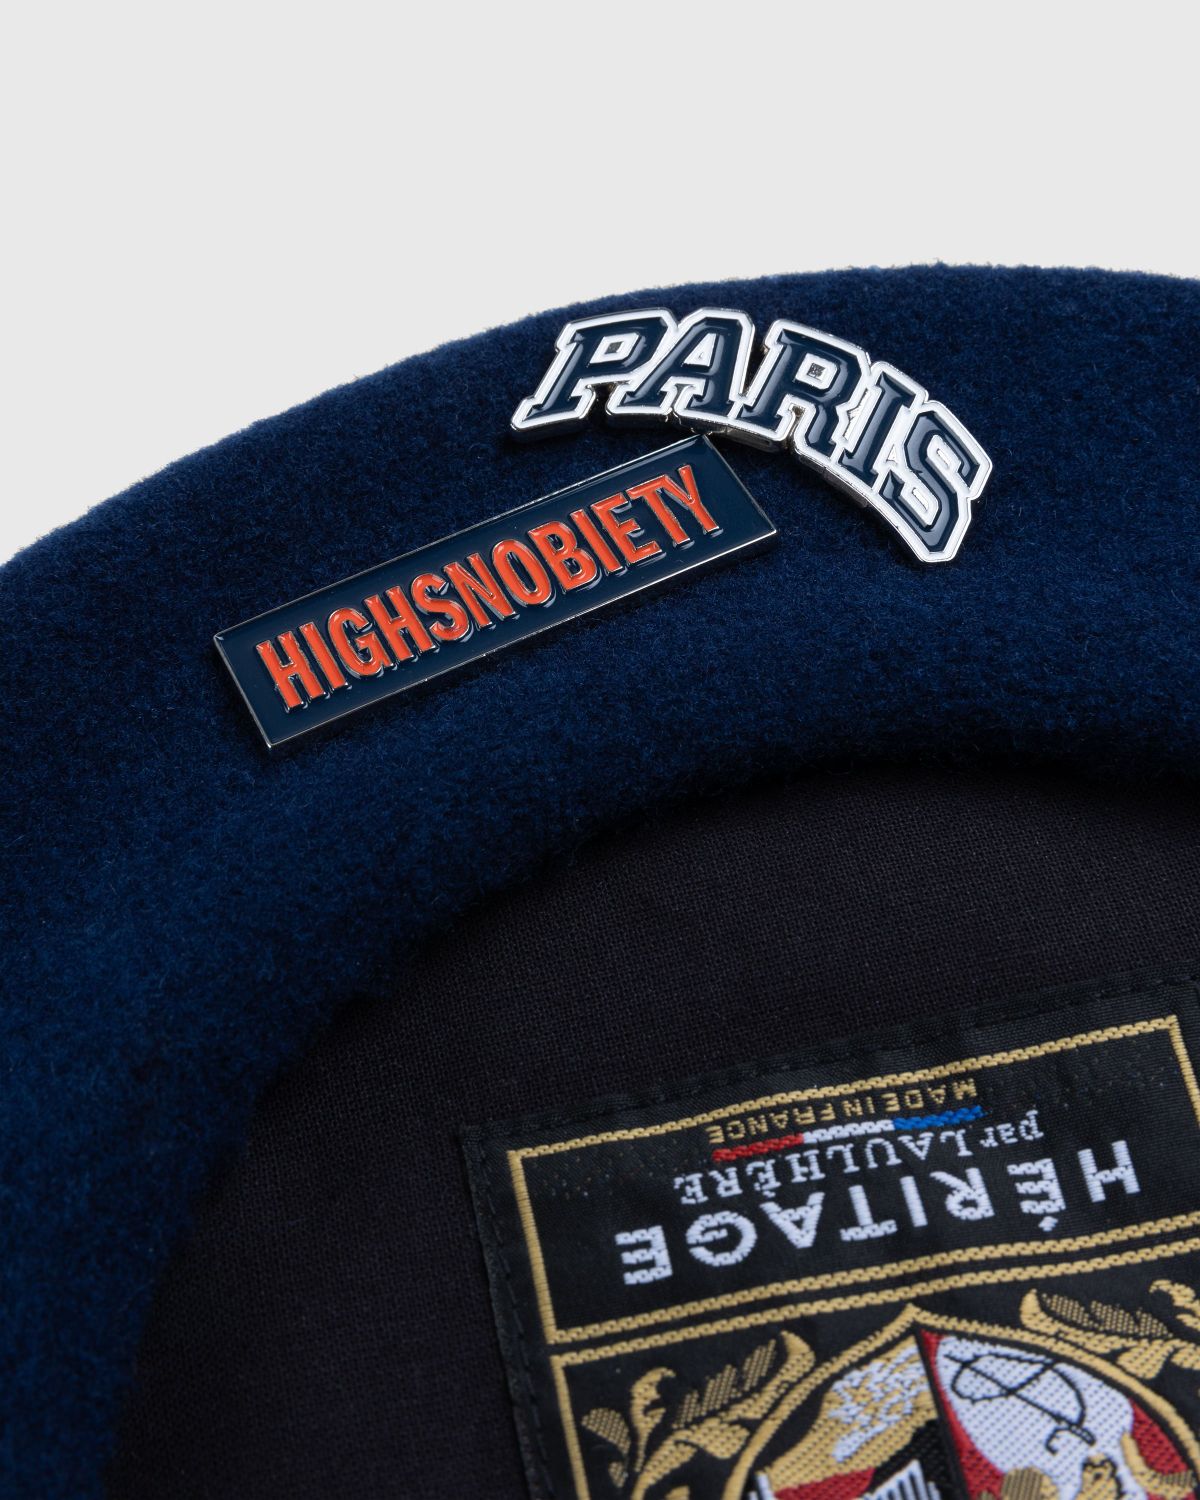 Highsnobiety – Not in Paris 5 Beret with Paris Pins - Hats - Blue - Image 5